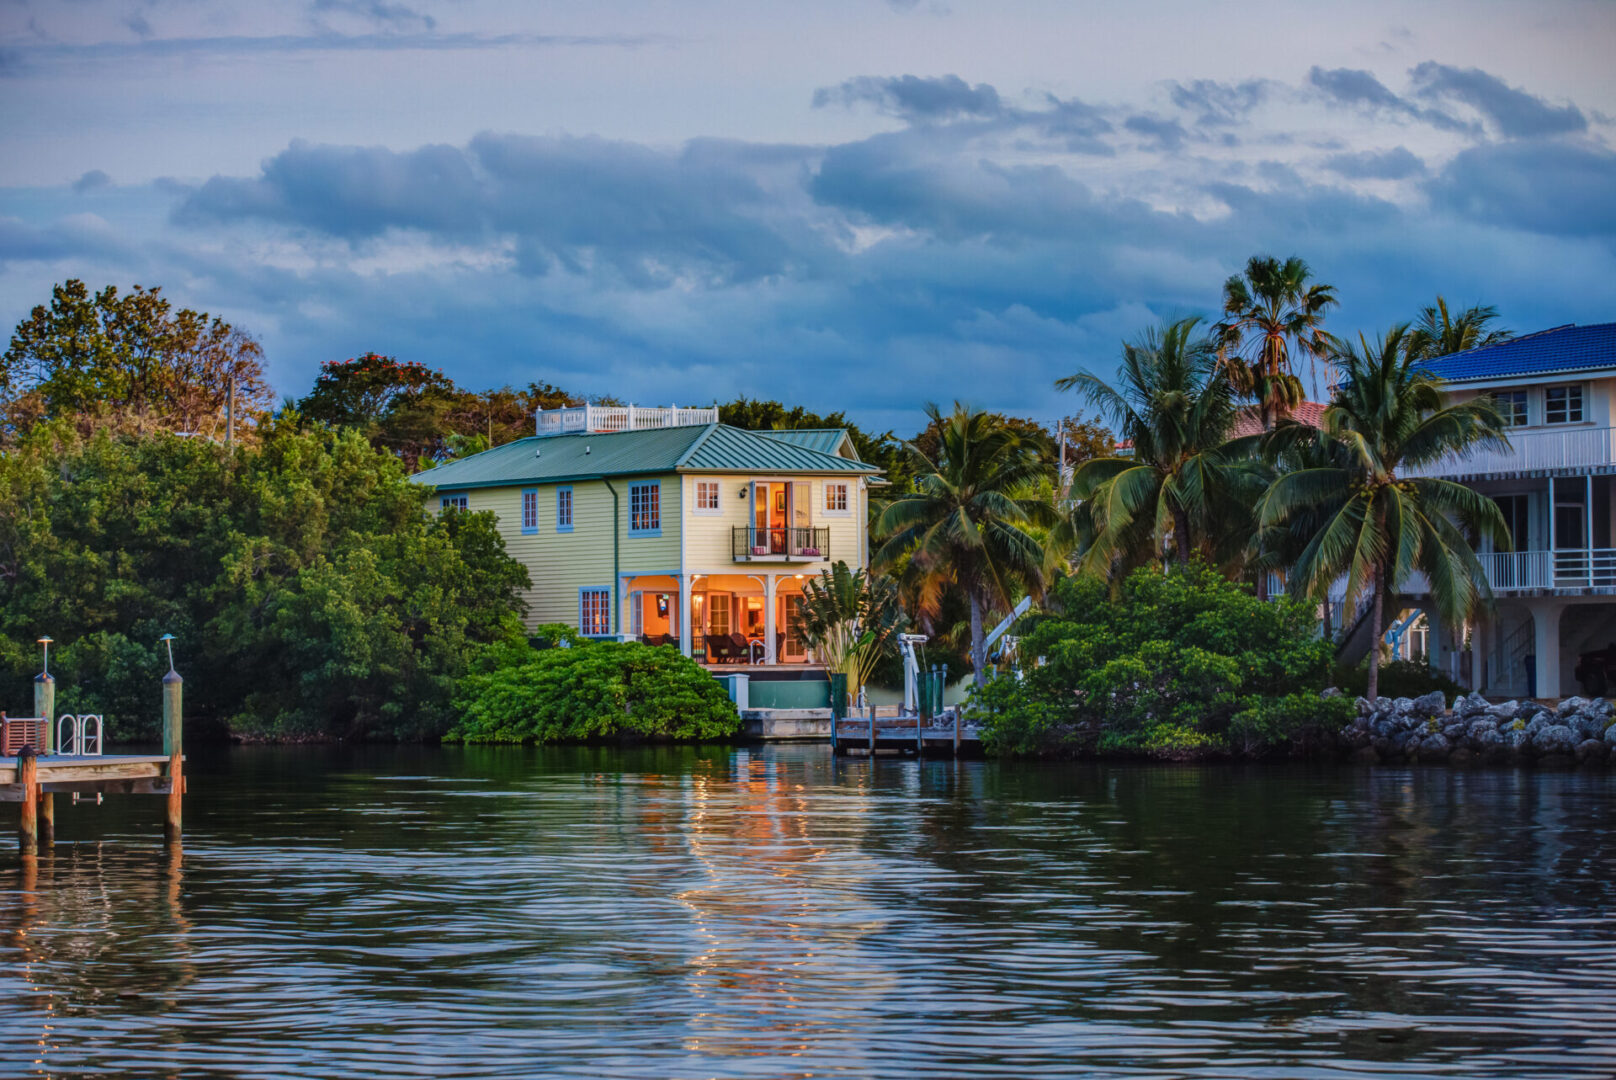 A house on the water with trees in front of it.